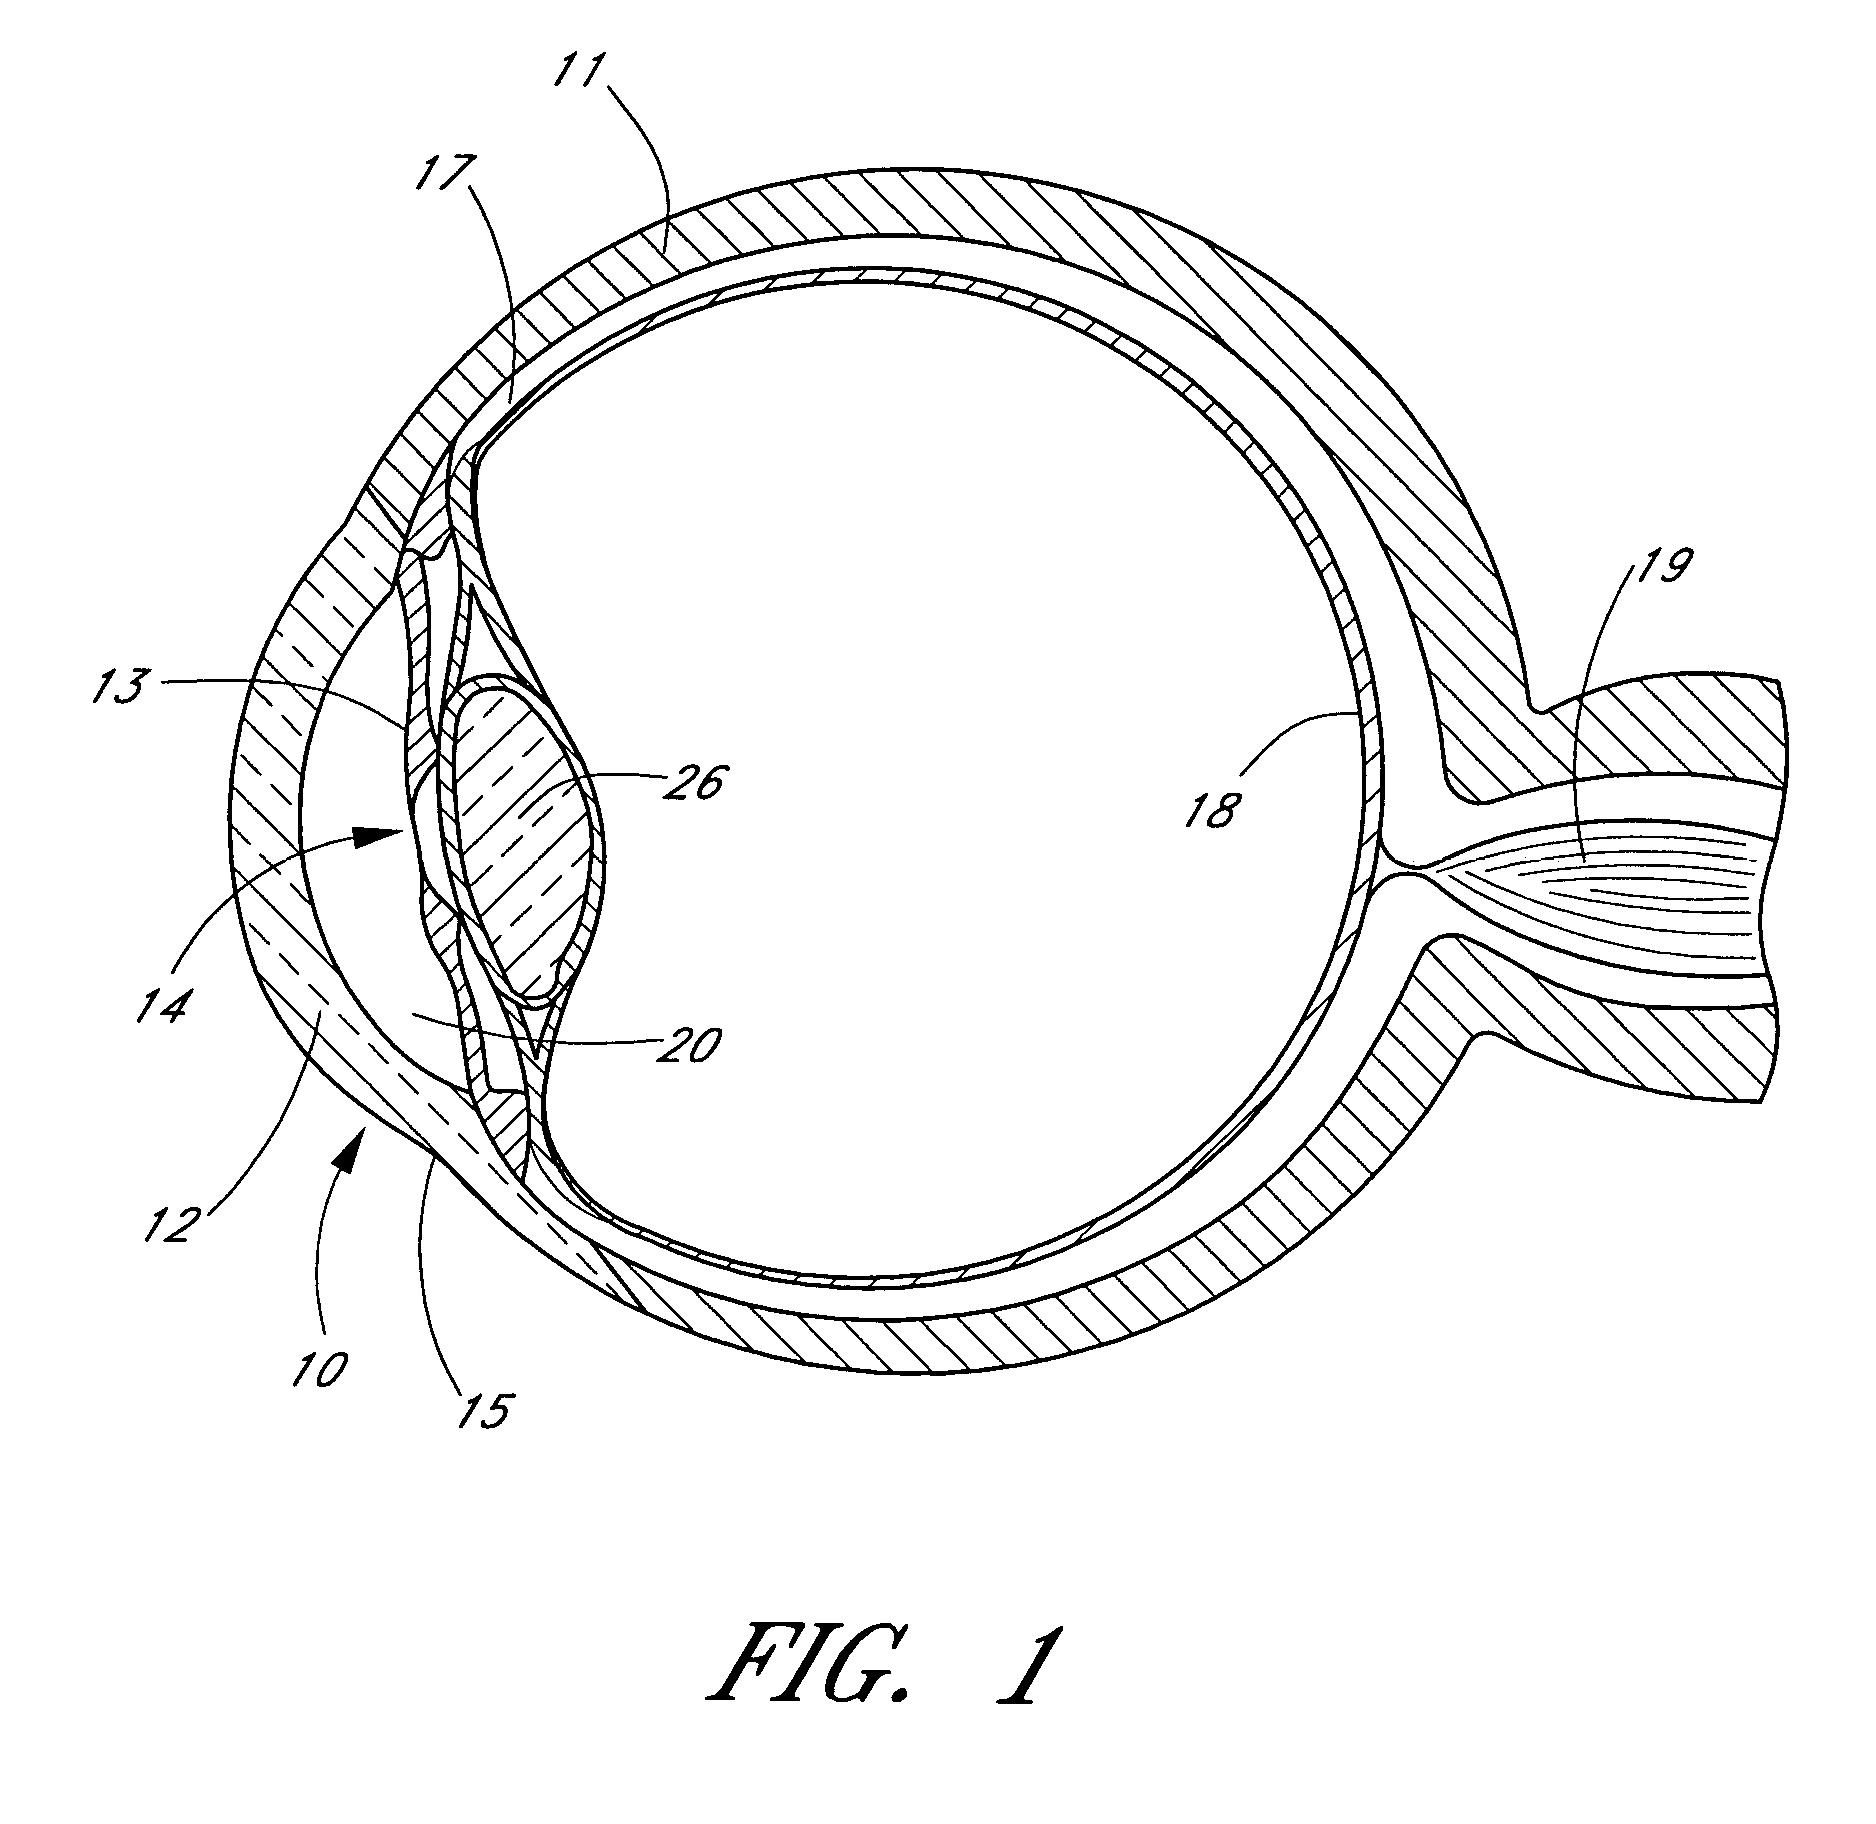 Ocular implant with anchor and multiple openings